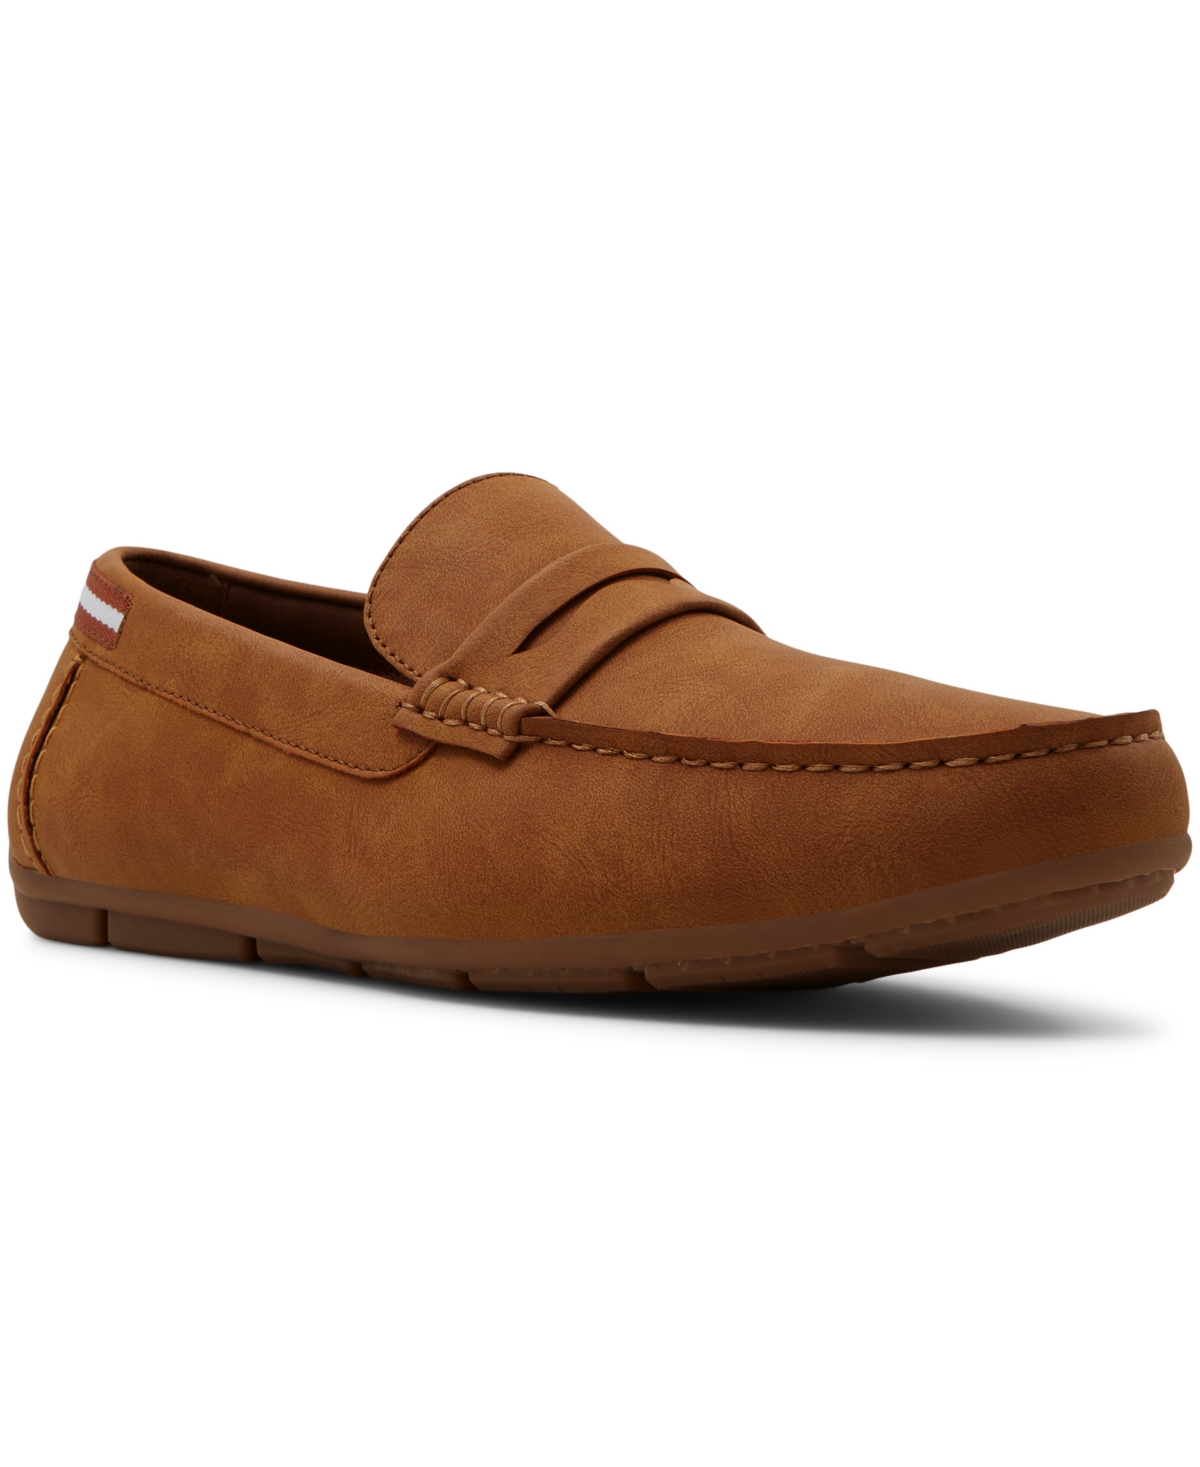 Men's Farina H Casual Slip On Loafers - Cognac